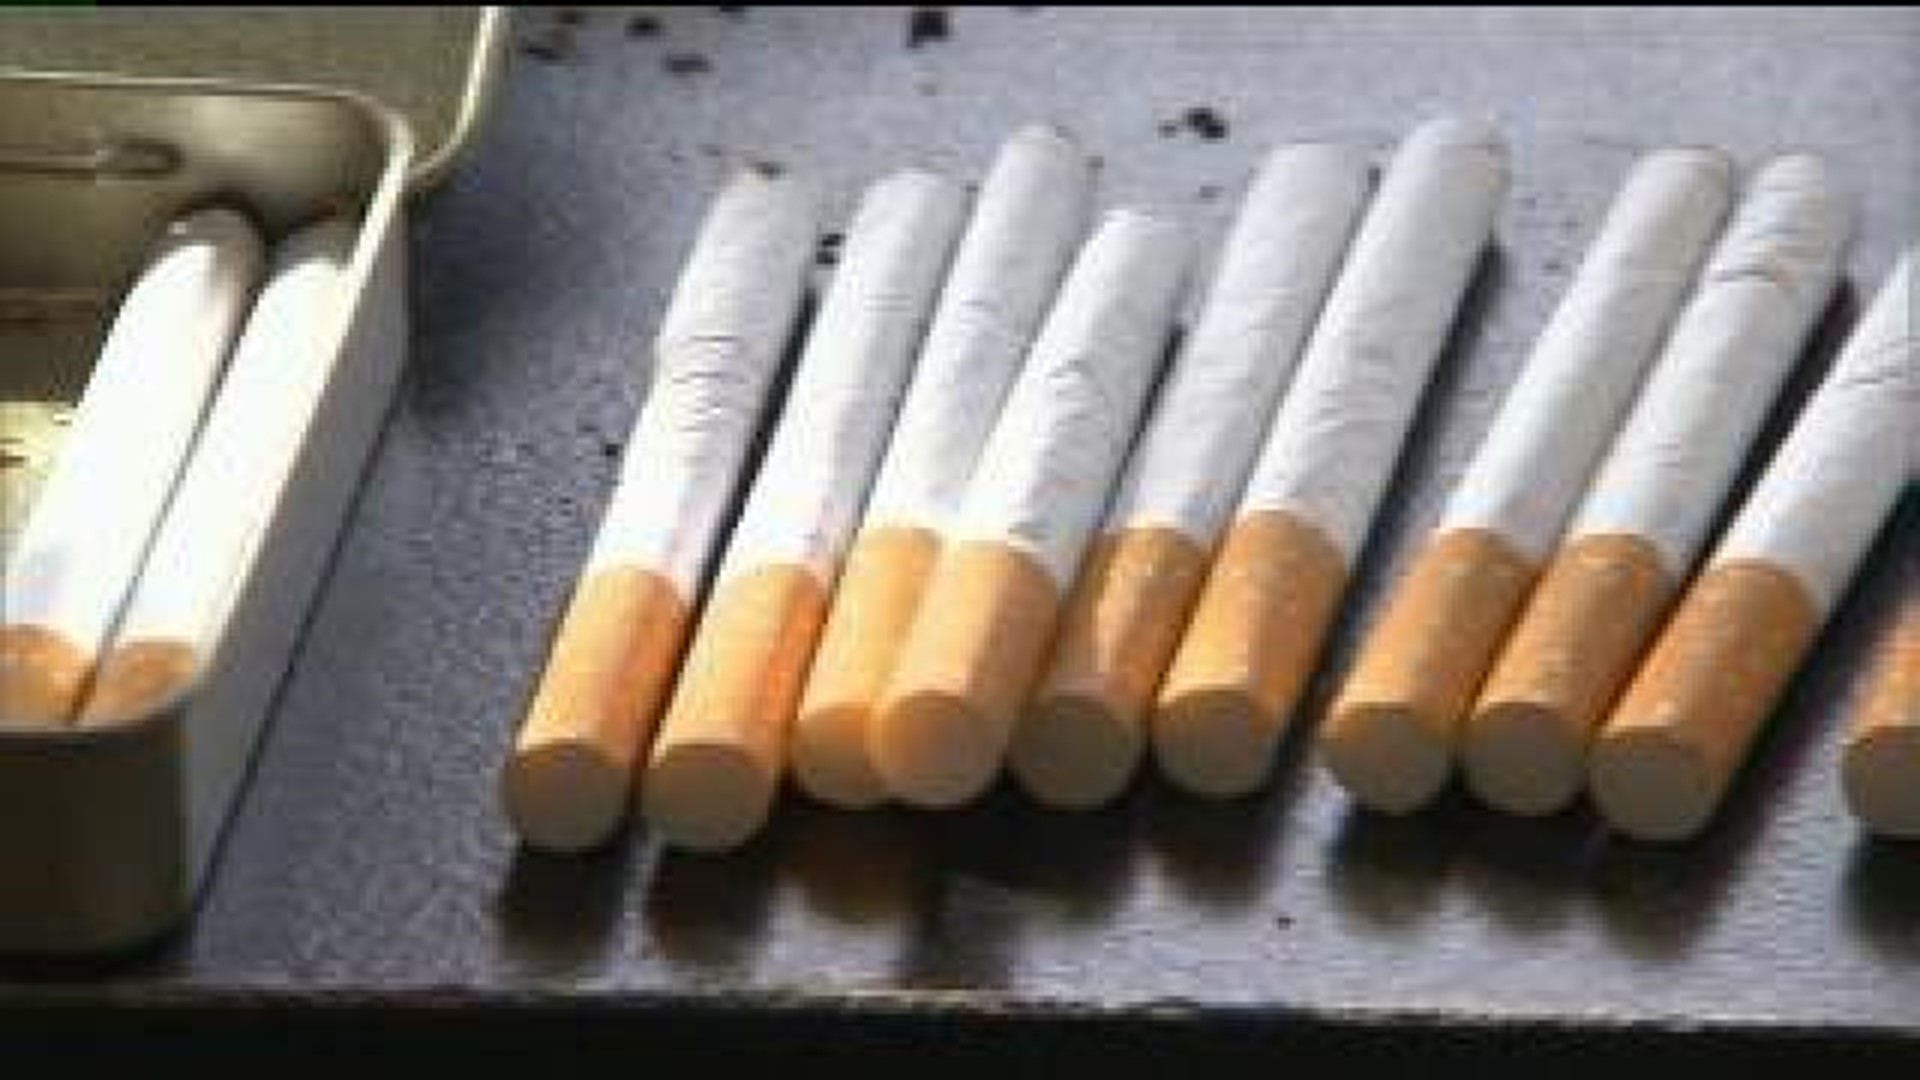 Reaction to NYC Increasing Legal Age to Buy Tobacco